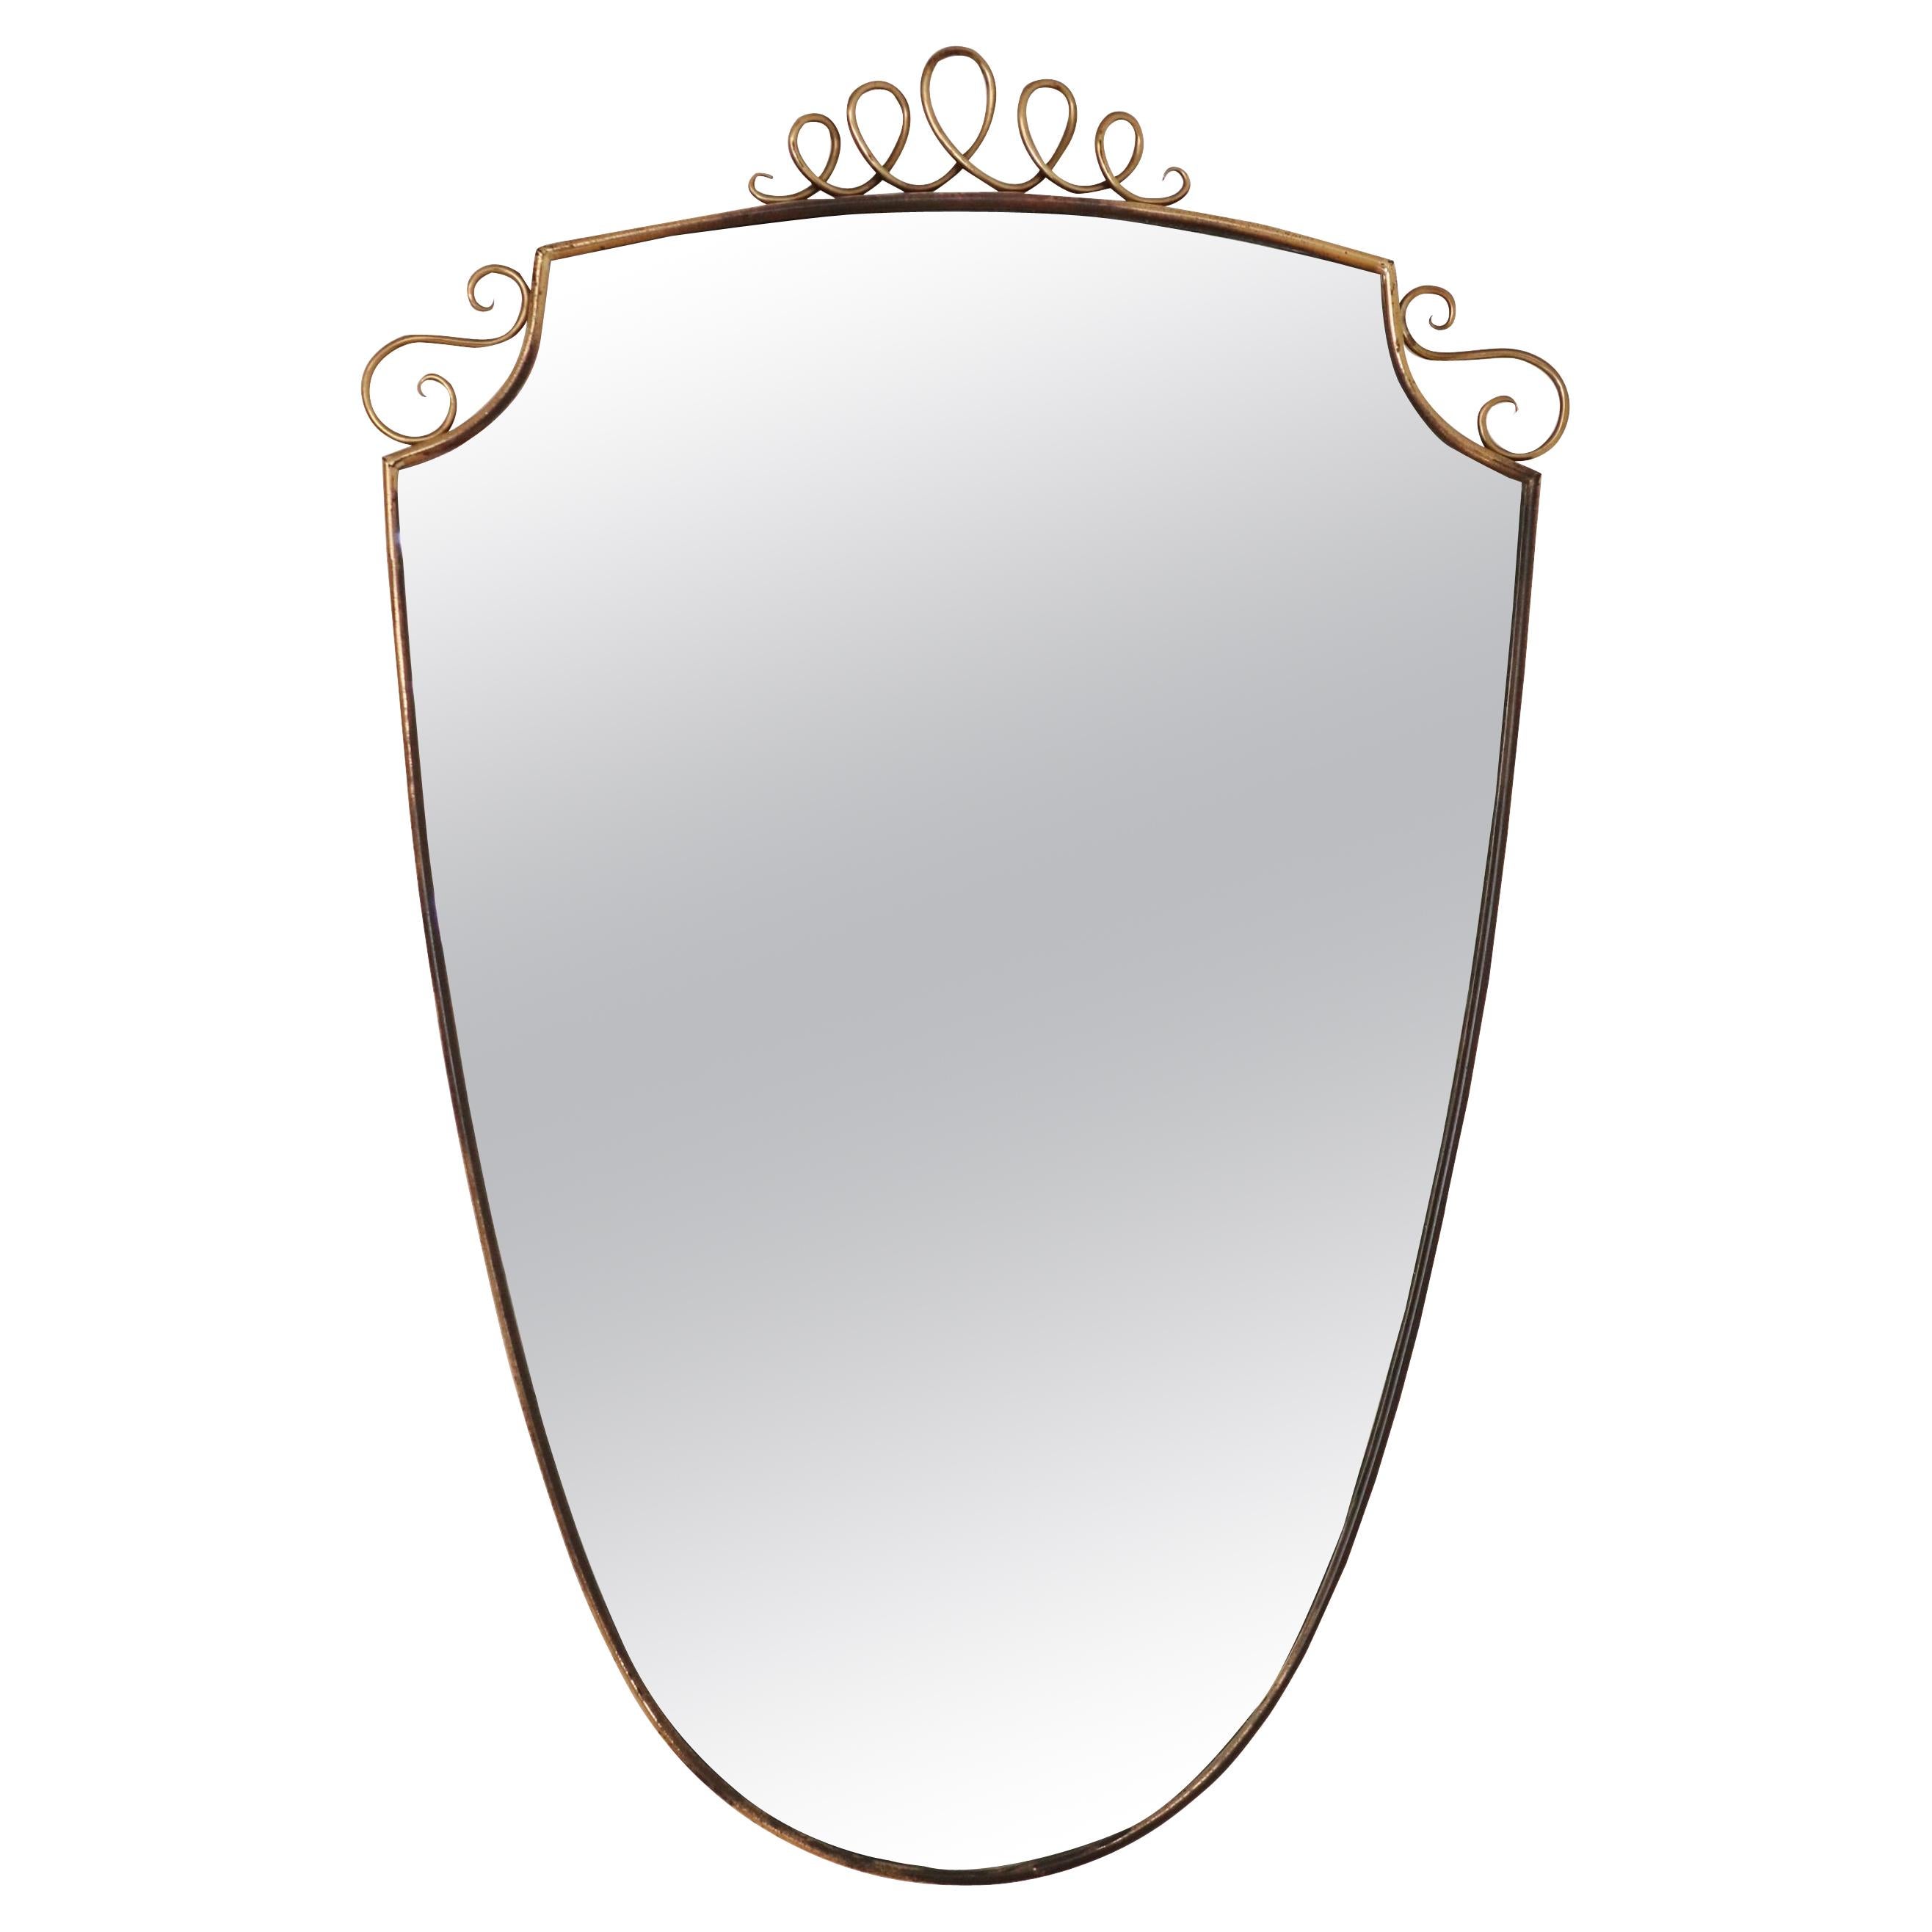 Italian Midcentury Brass Mirror with Decoration in the Style of Gio Ponti, 1950s